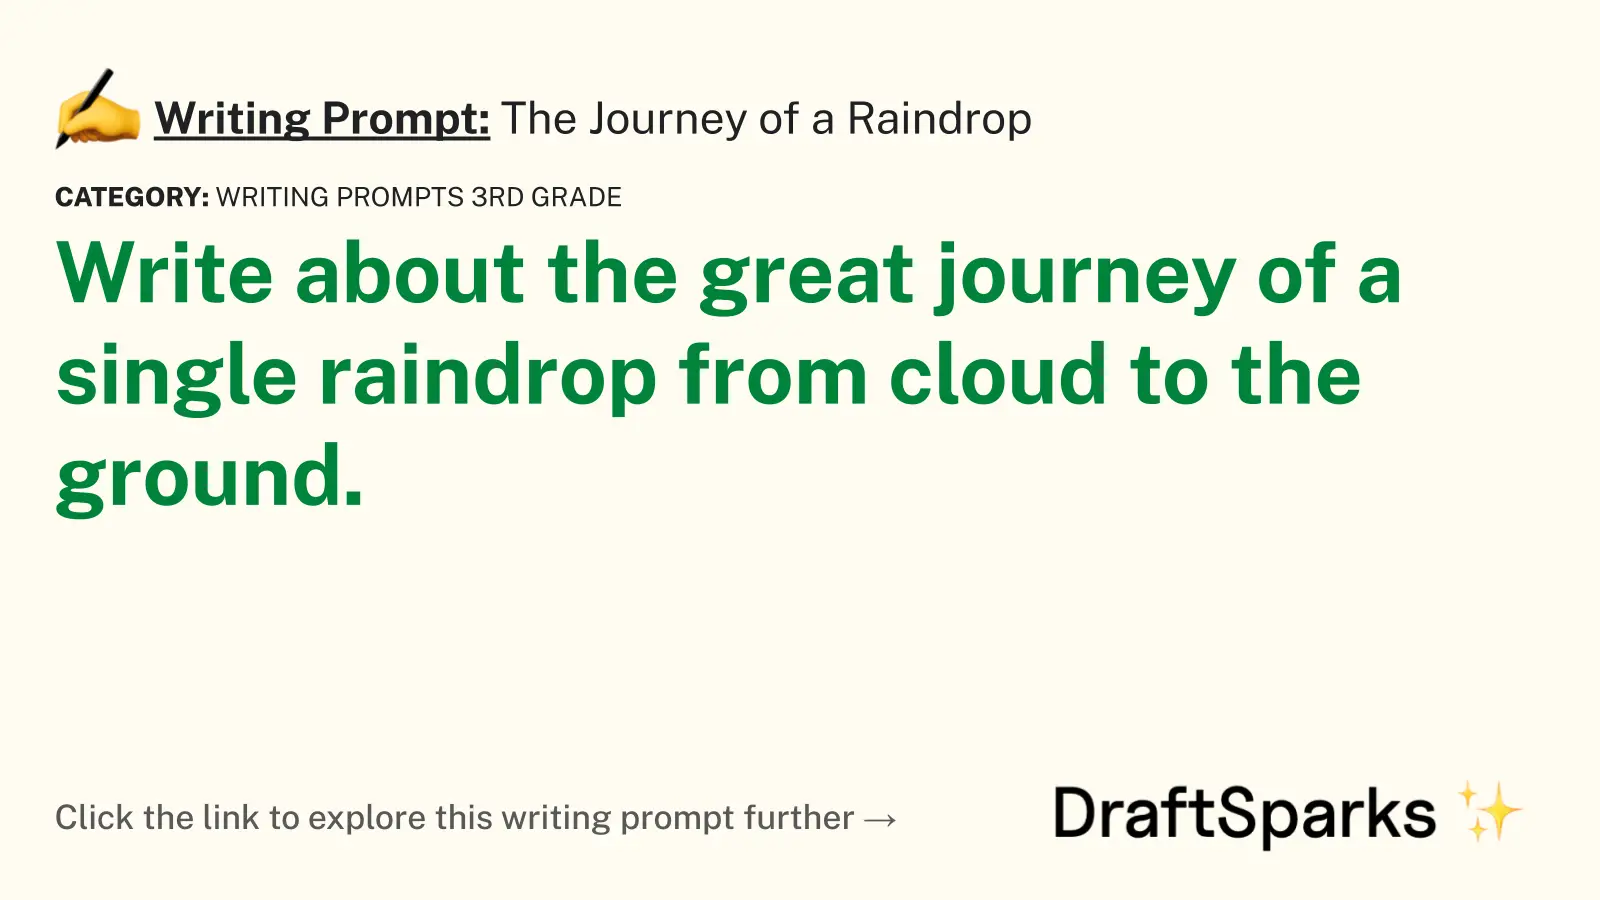 The Journey of a Raindrop